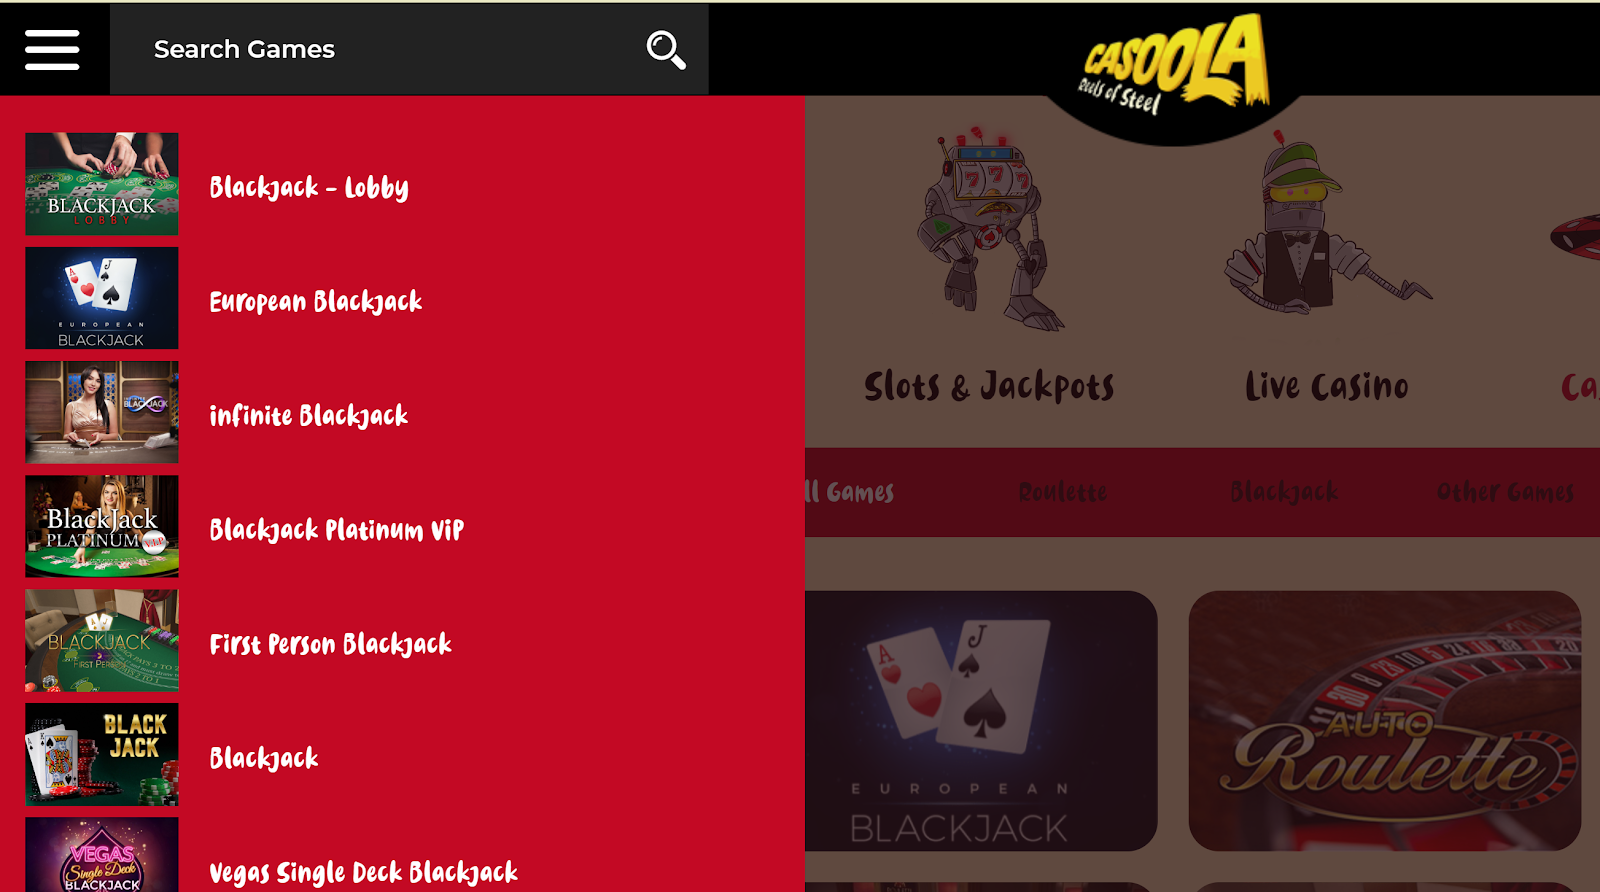 Casoola Casino has lots of great blackjack games that you can play 